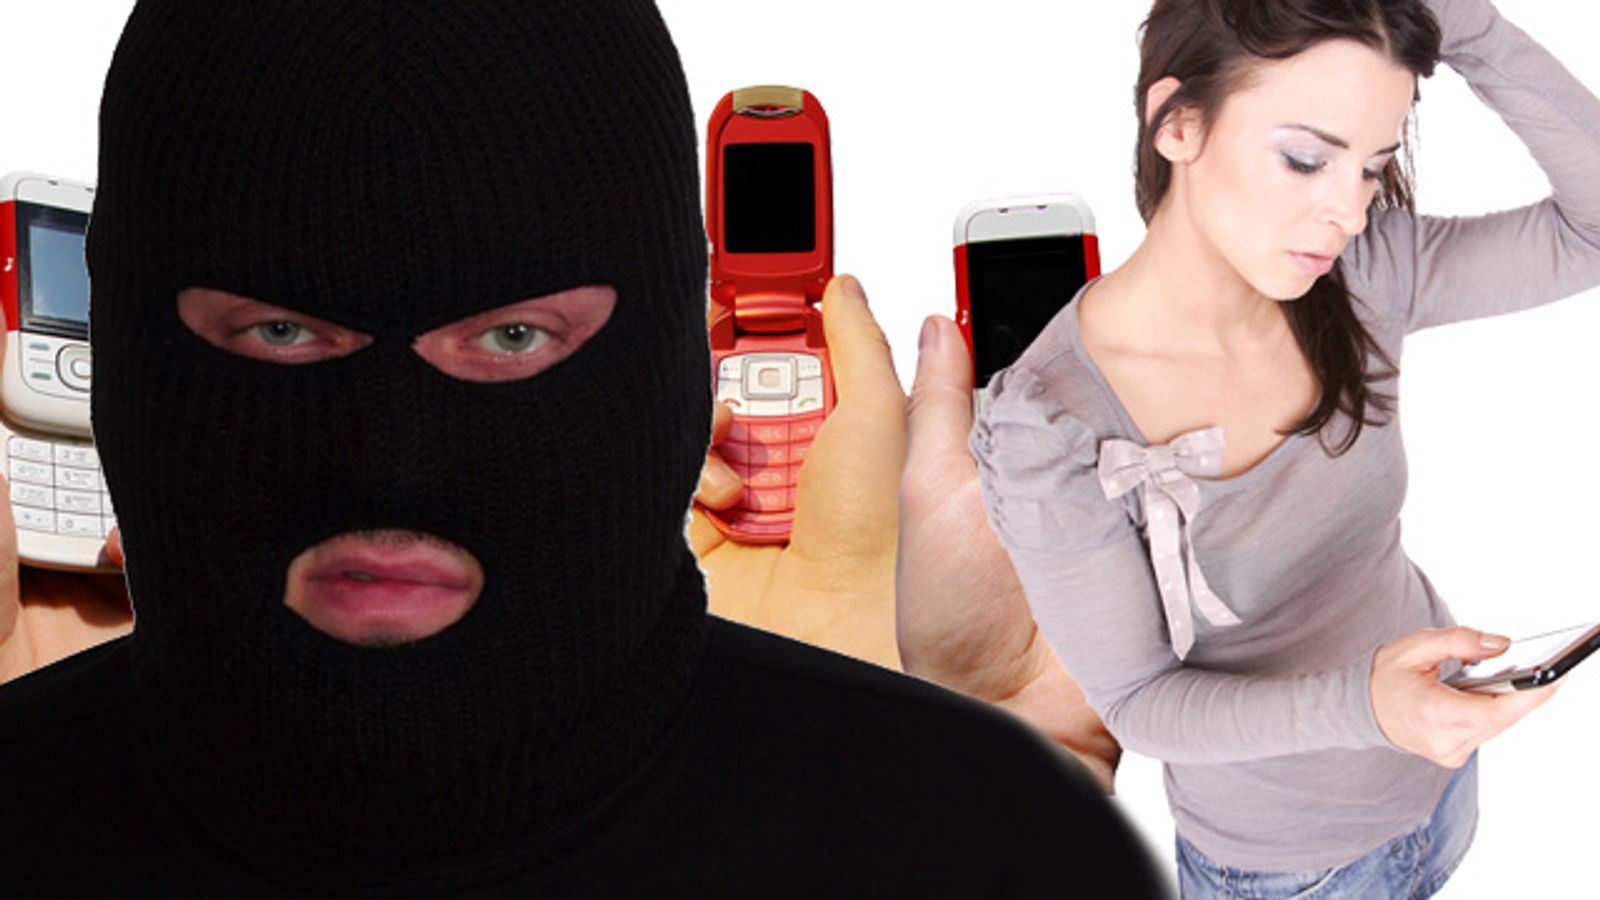 They’re Back! New Dialer Scams Target Smartphones